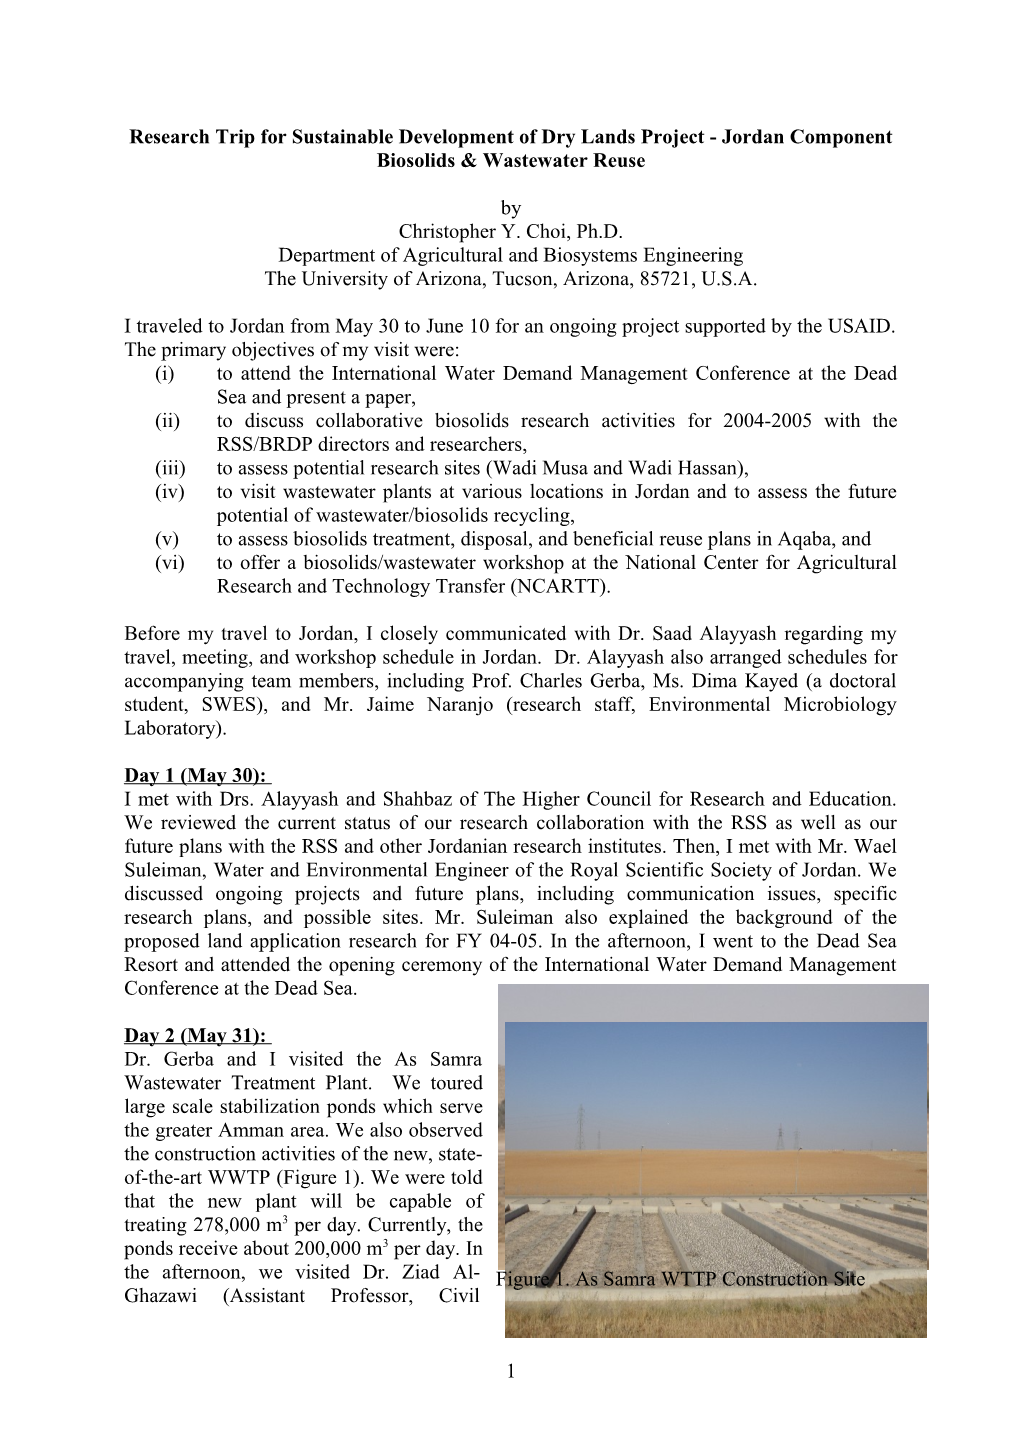 Research Trip for Sustainable Development of Dry Lands Project - Jordan Component